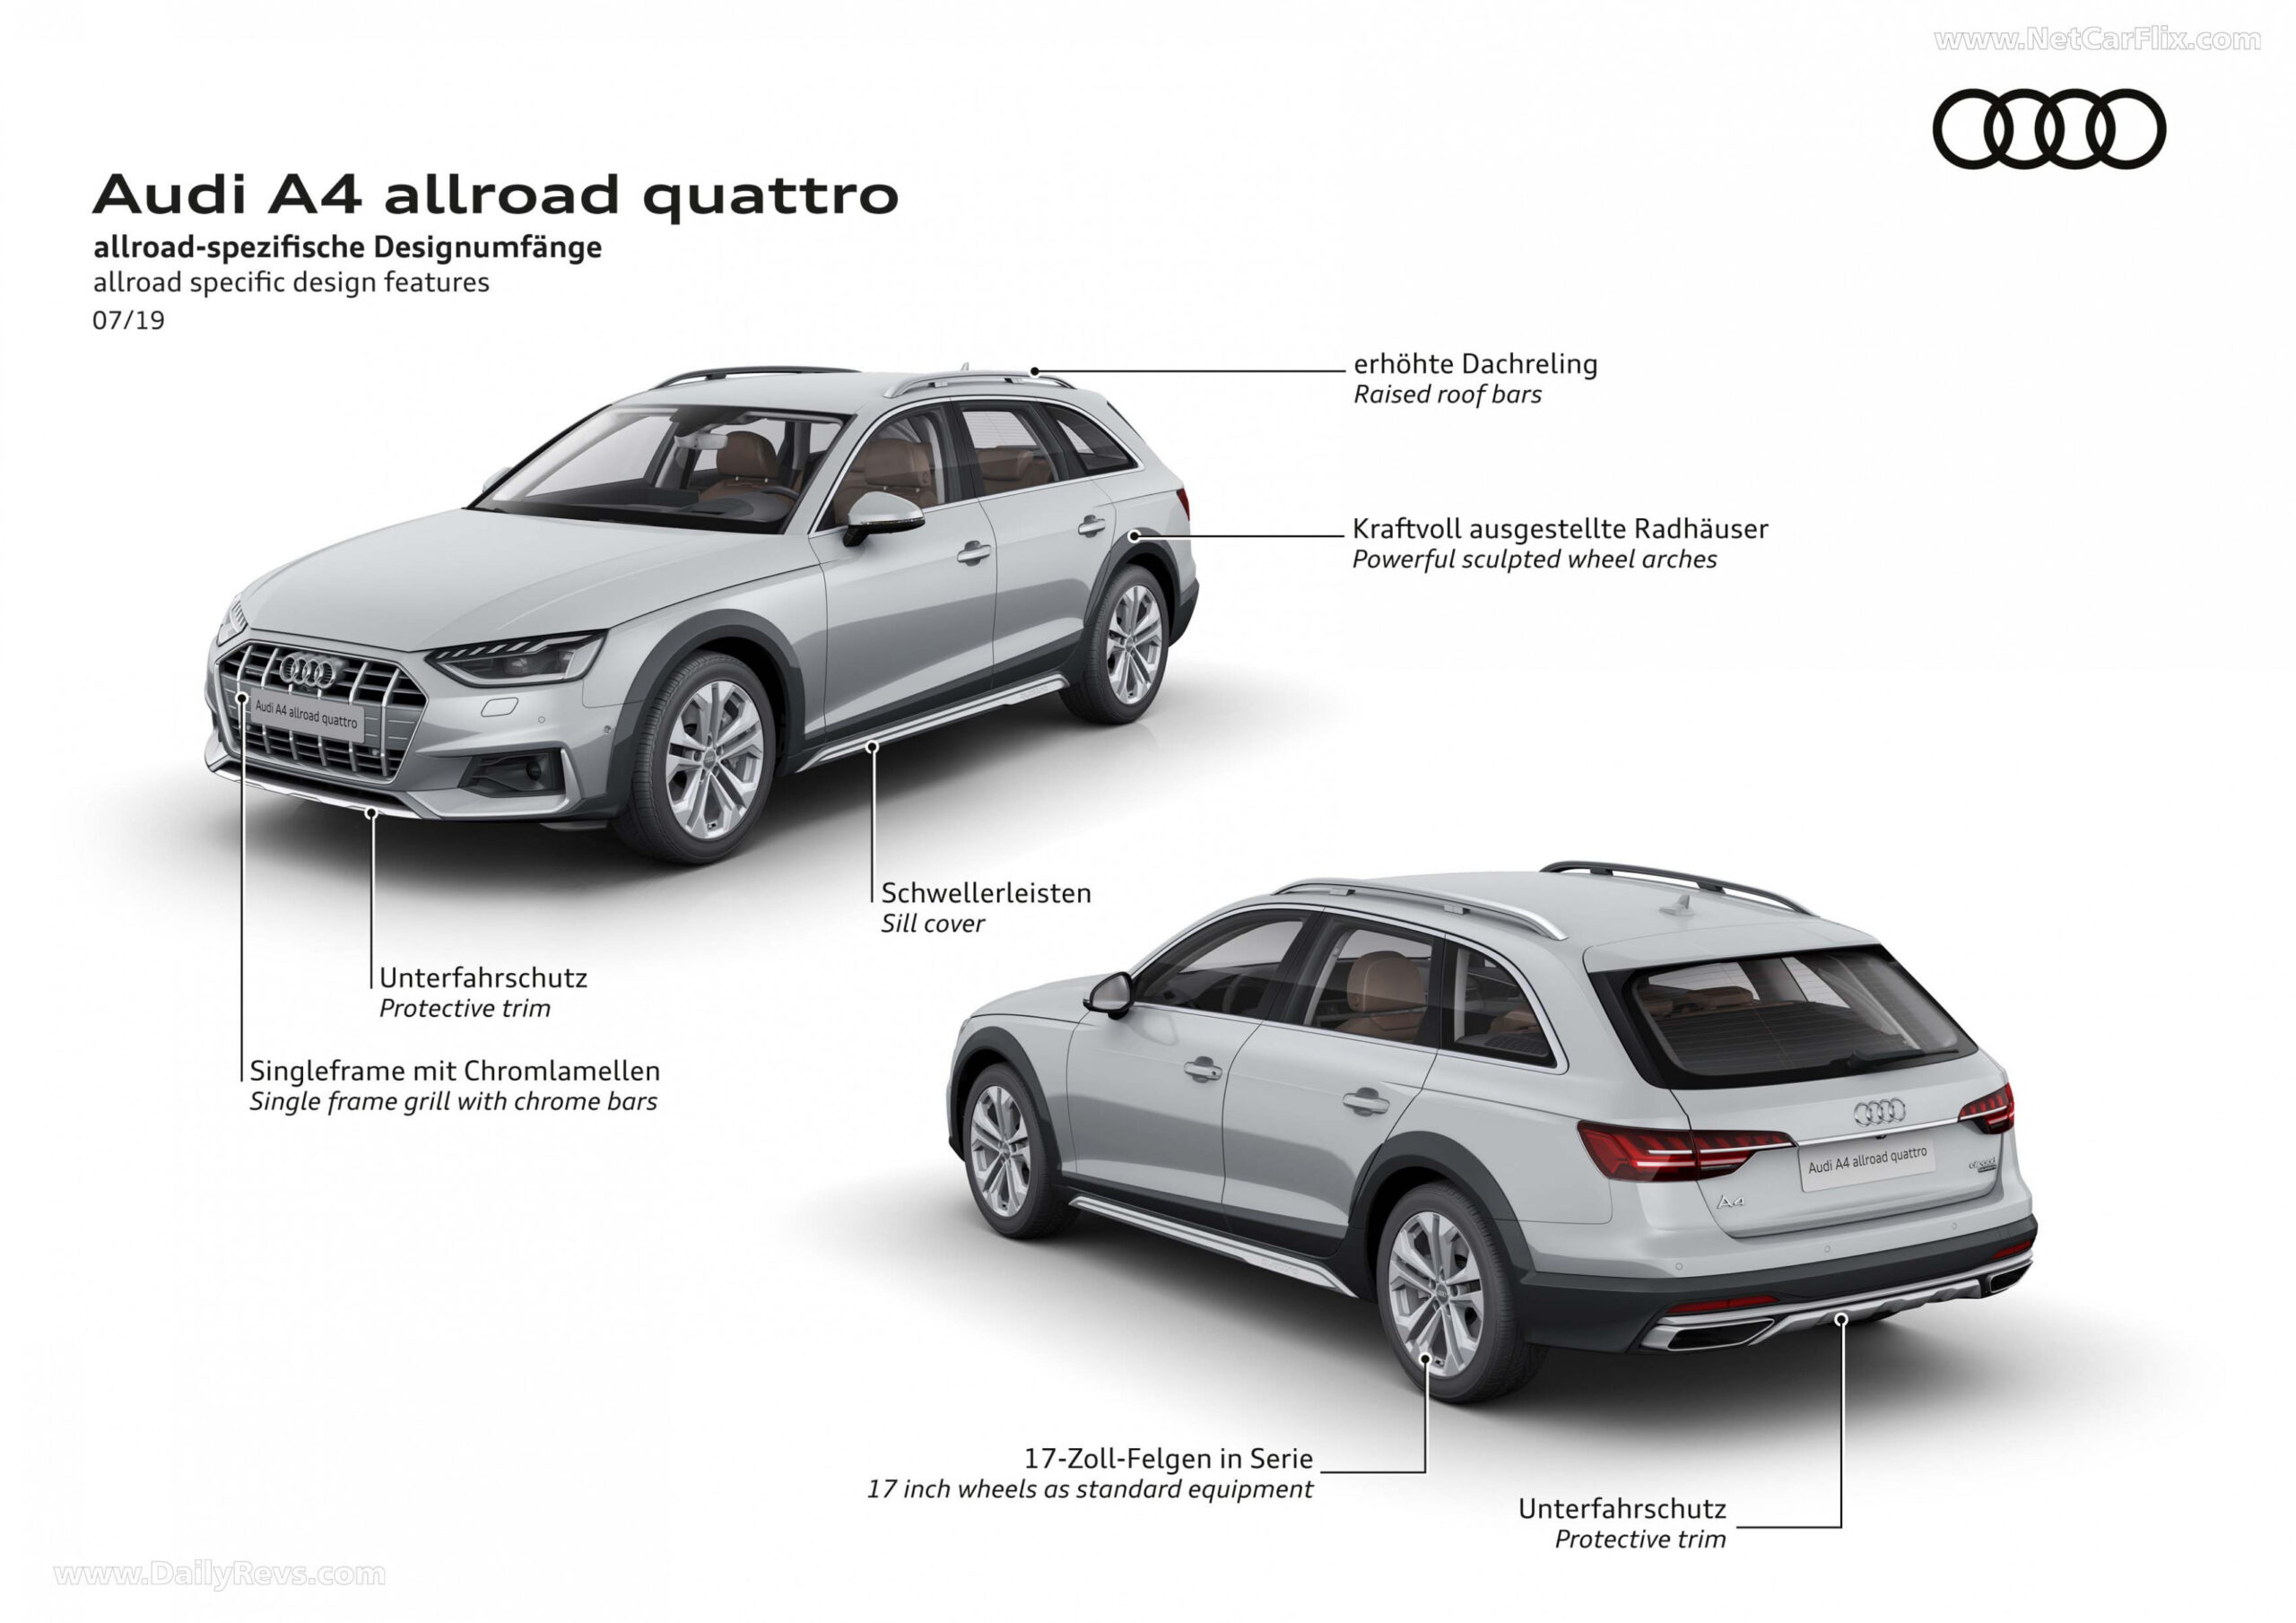 Redesign and Concept audi a4 ground clearance